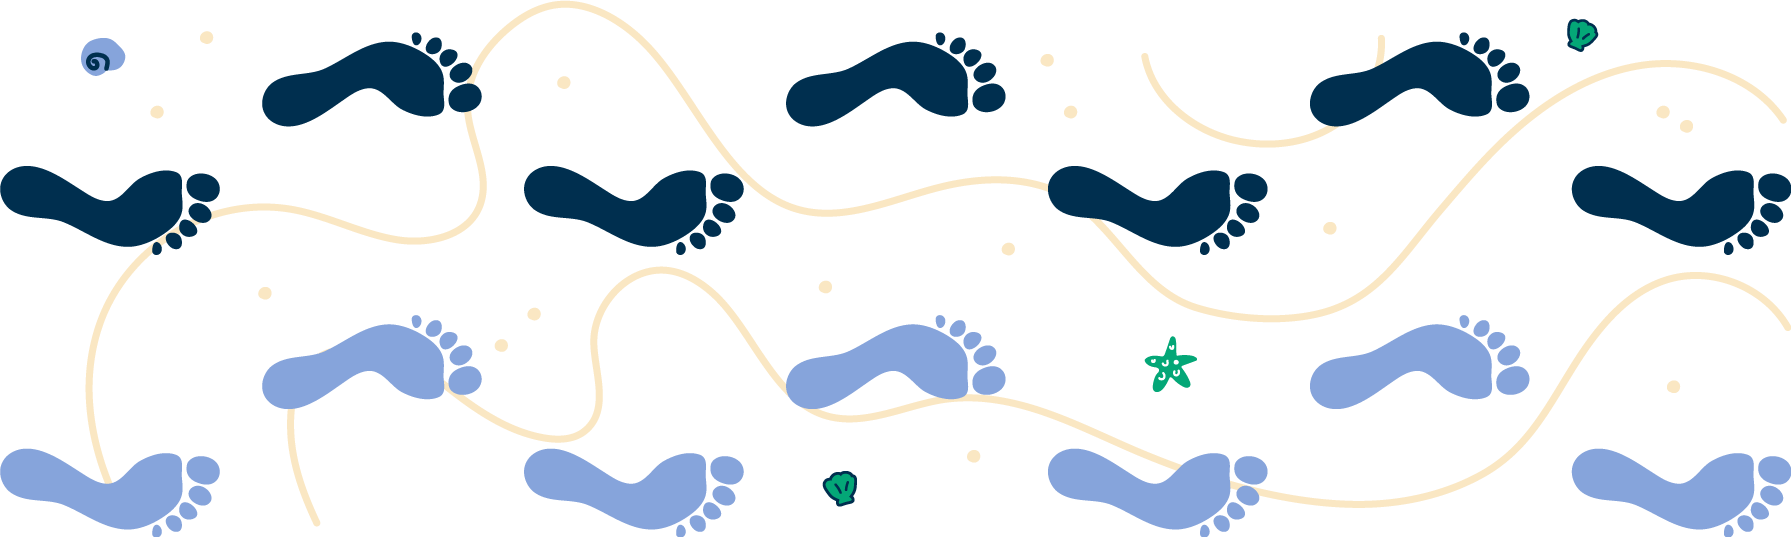 Illustration of two sets of footprints on the beach with sea shells and wavy lines that waves have made on the beach